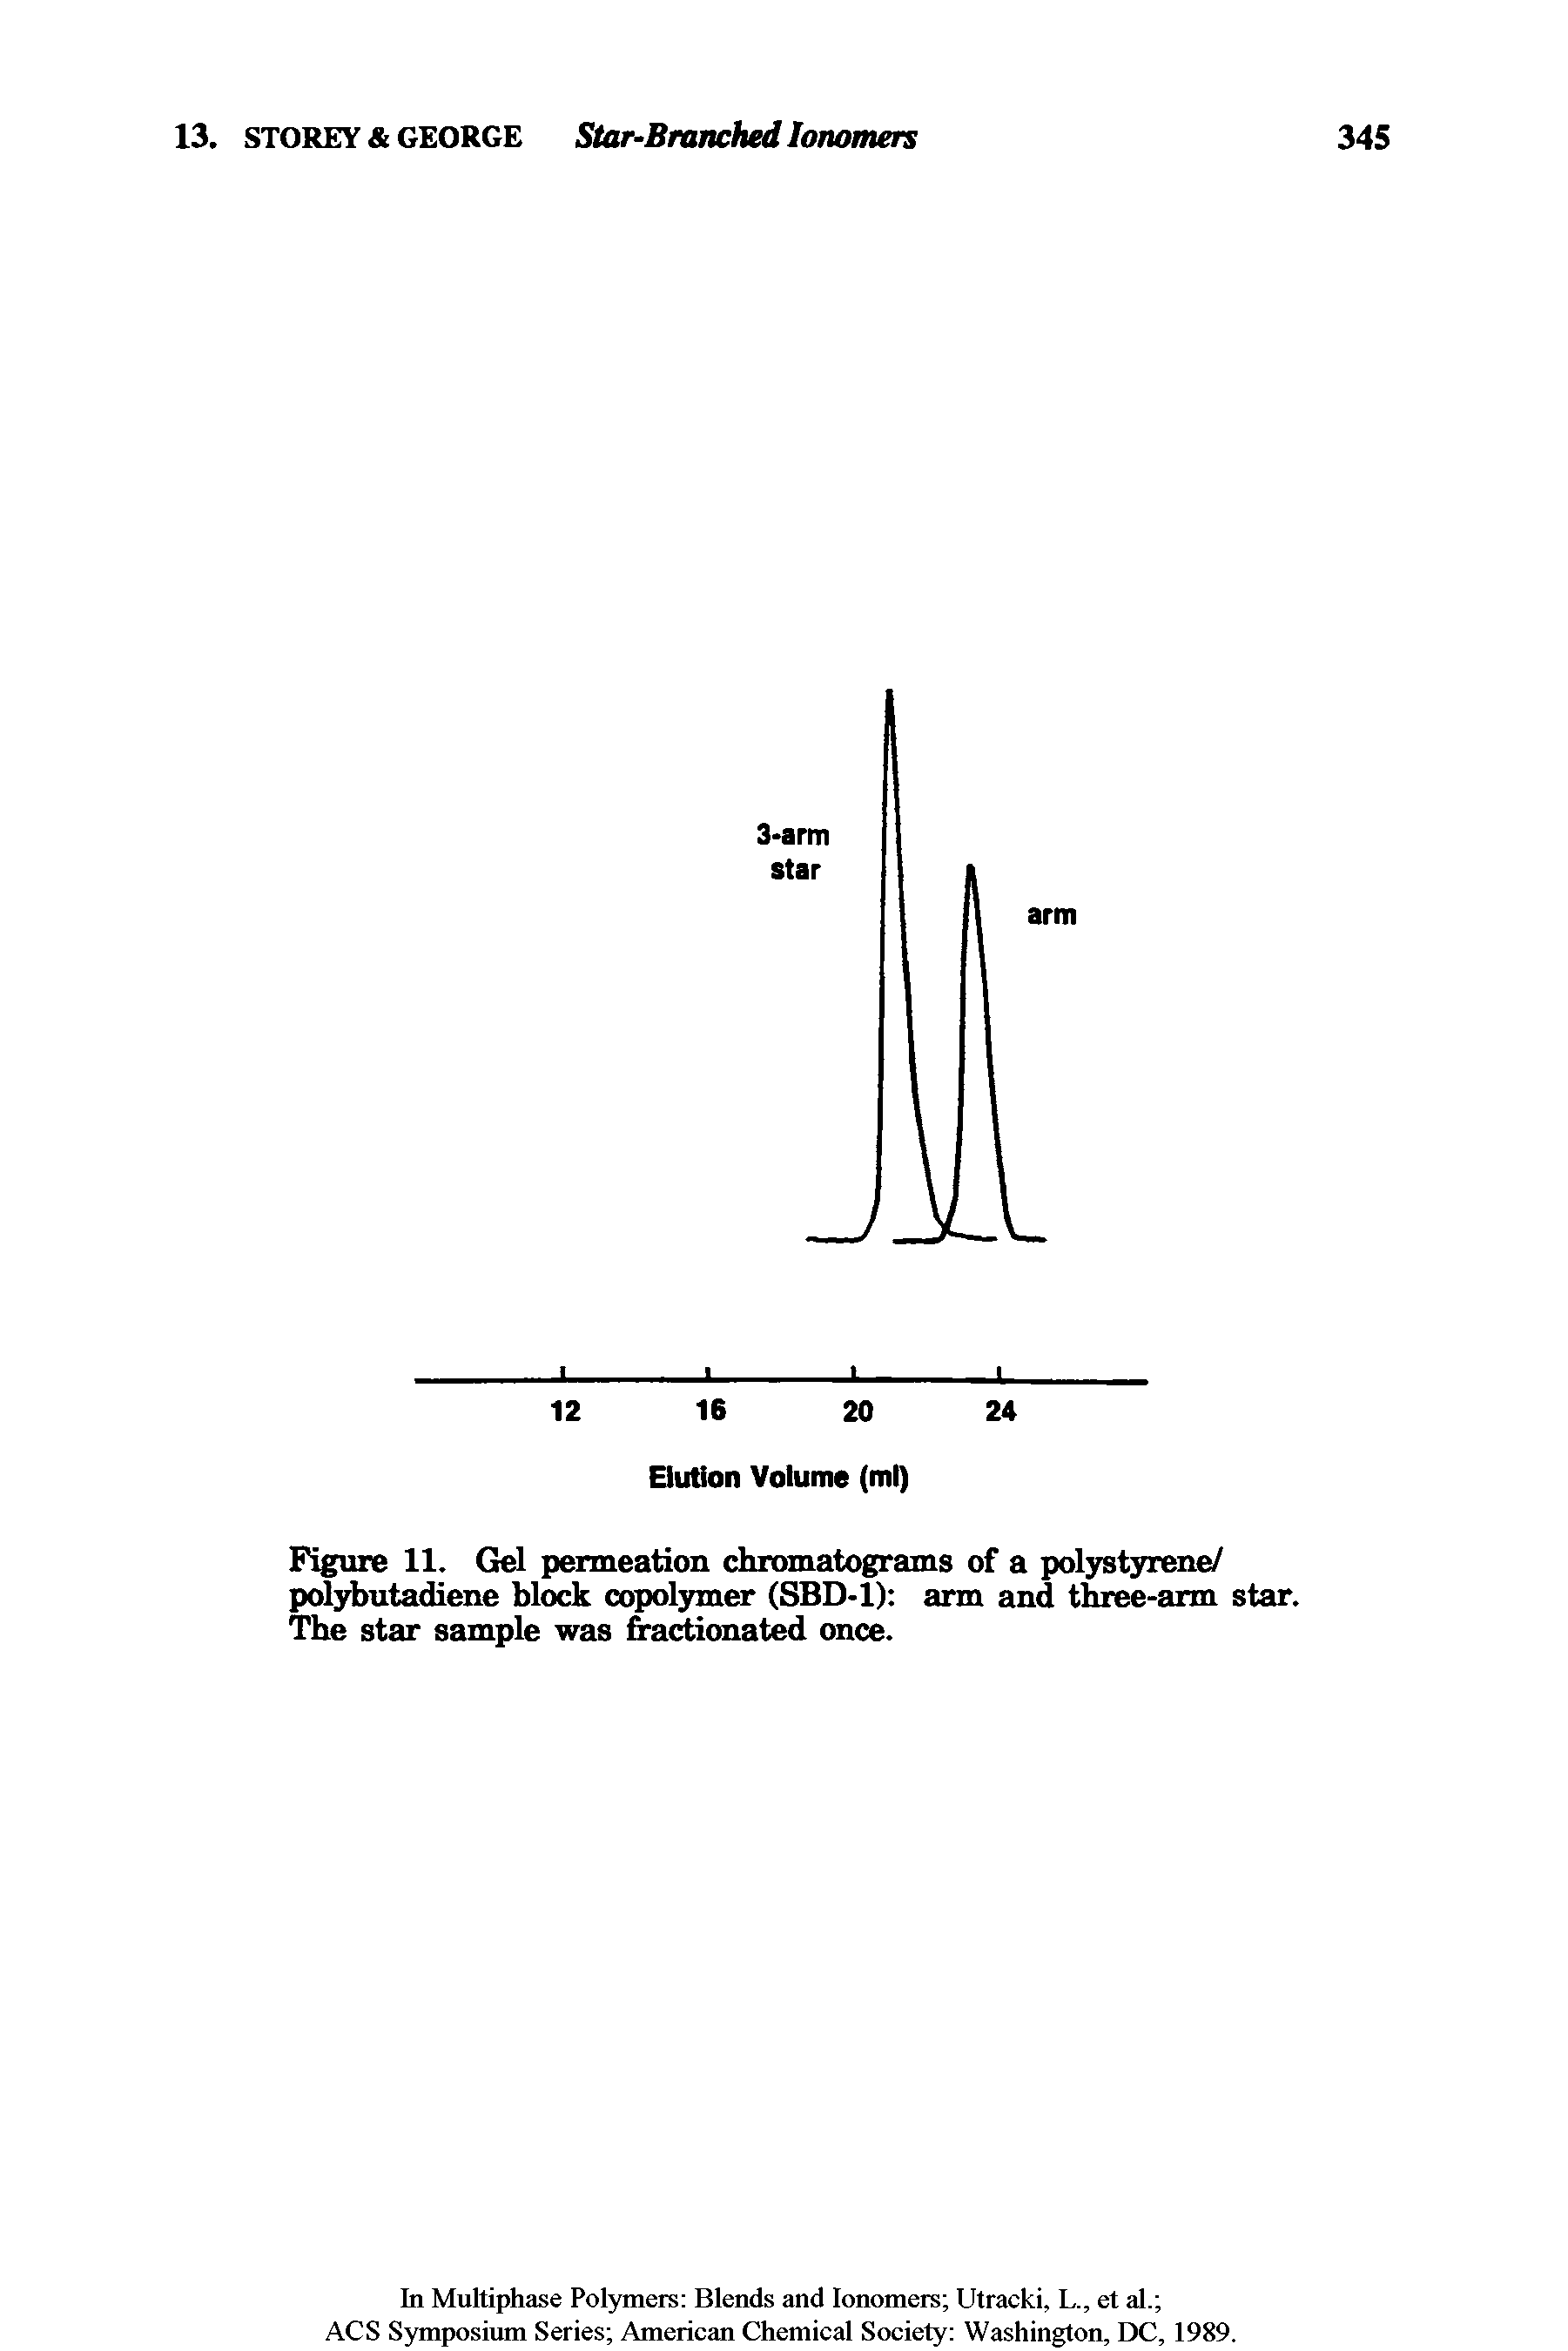 Figure 11. Gel permeation chromatograms of a polystyrene/ polybutadiene block copolymer (SBD-1) arm and three-arm star. The star sample was fractionated once.